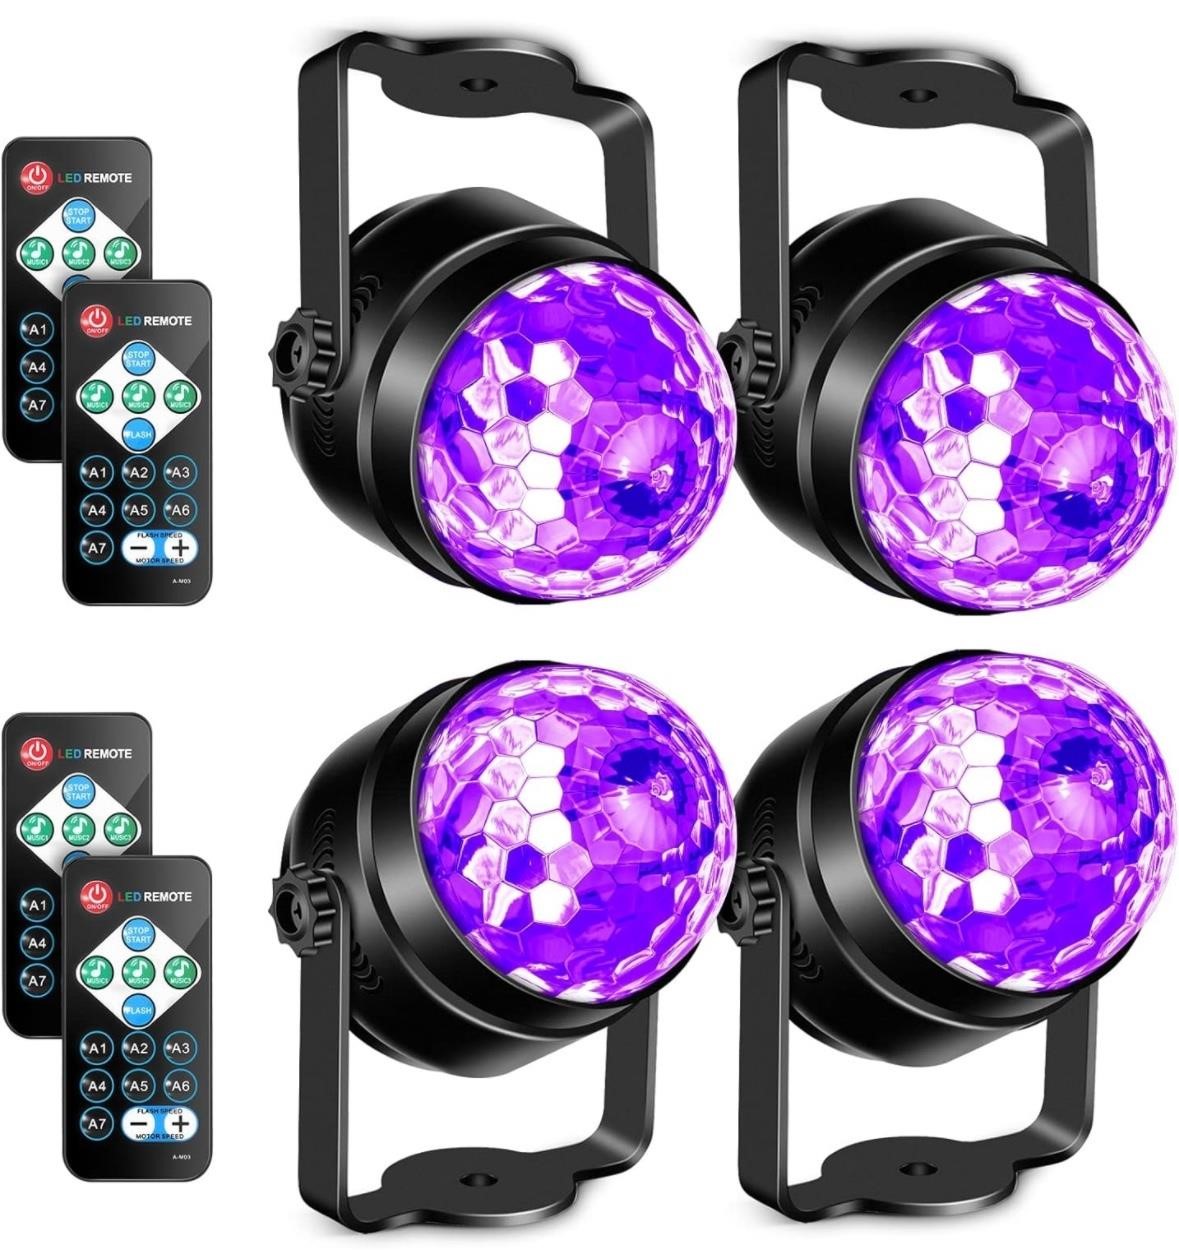 UV Black Lights for Glow Party, 6W( 4 Pack)